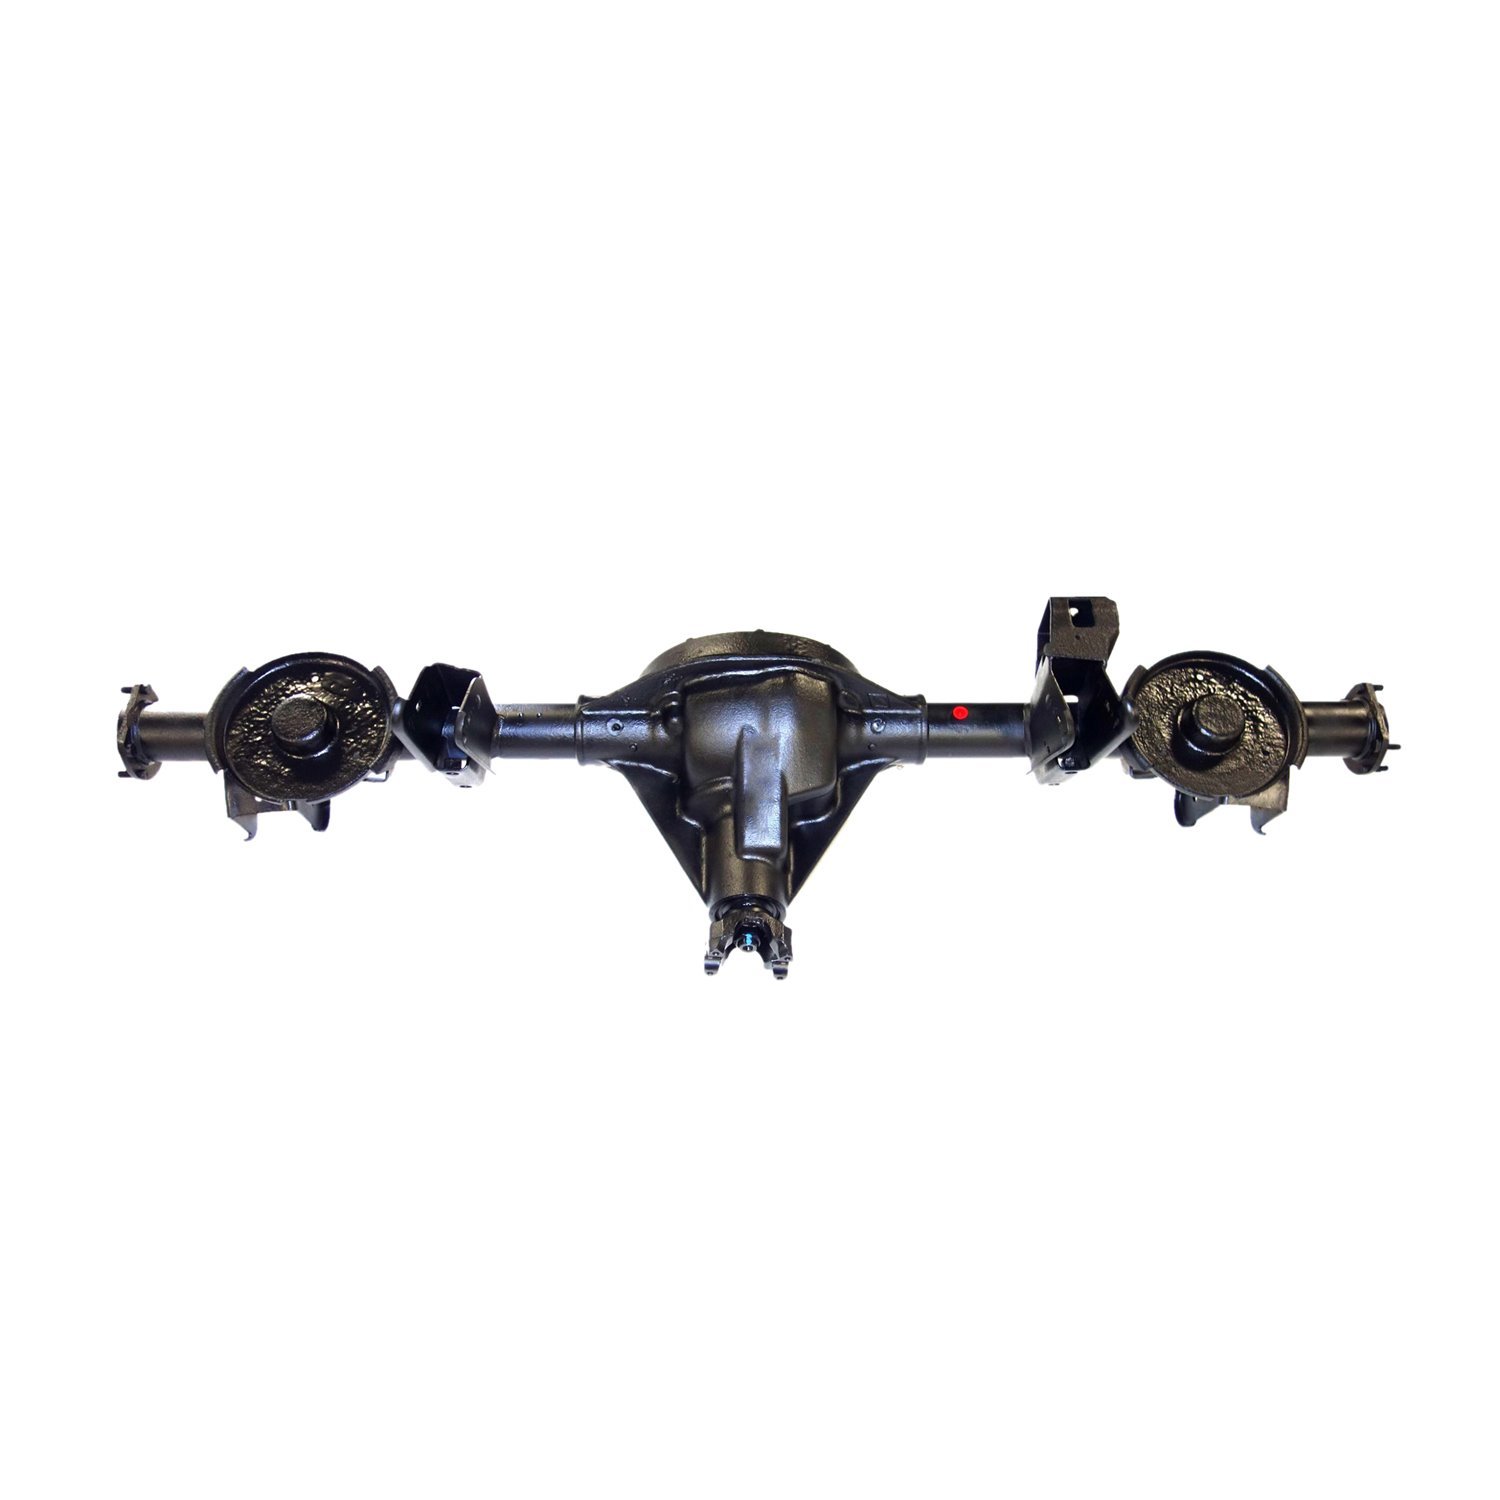 Remanufactured Complete Axle Assembly for Dana 35 93-95 Wrangler 3.55 with ABS, Posi LSD